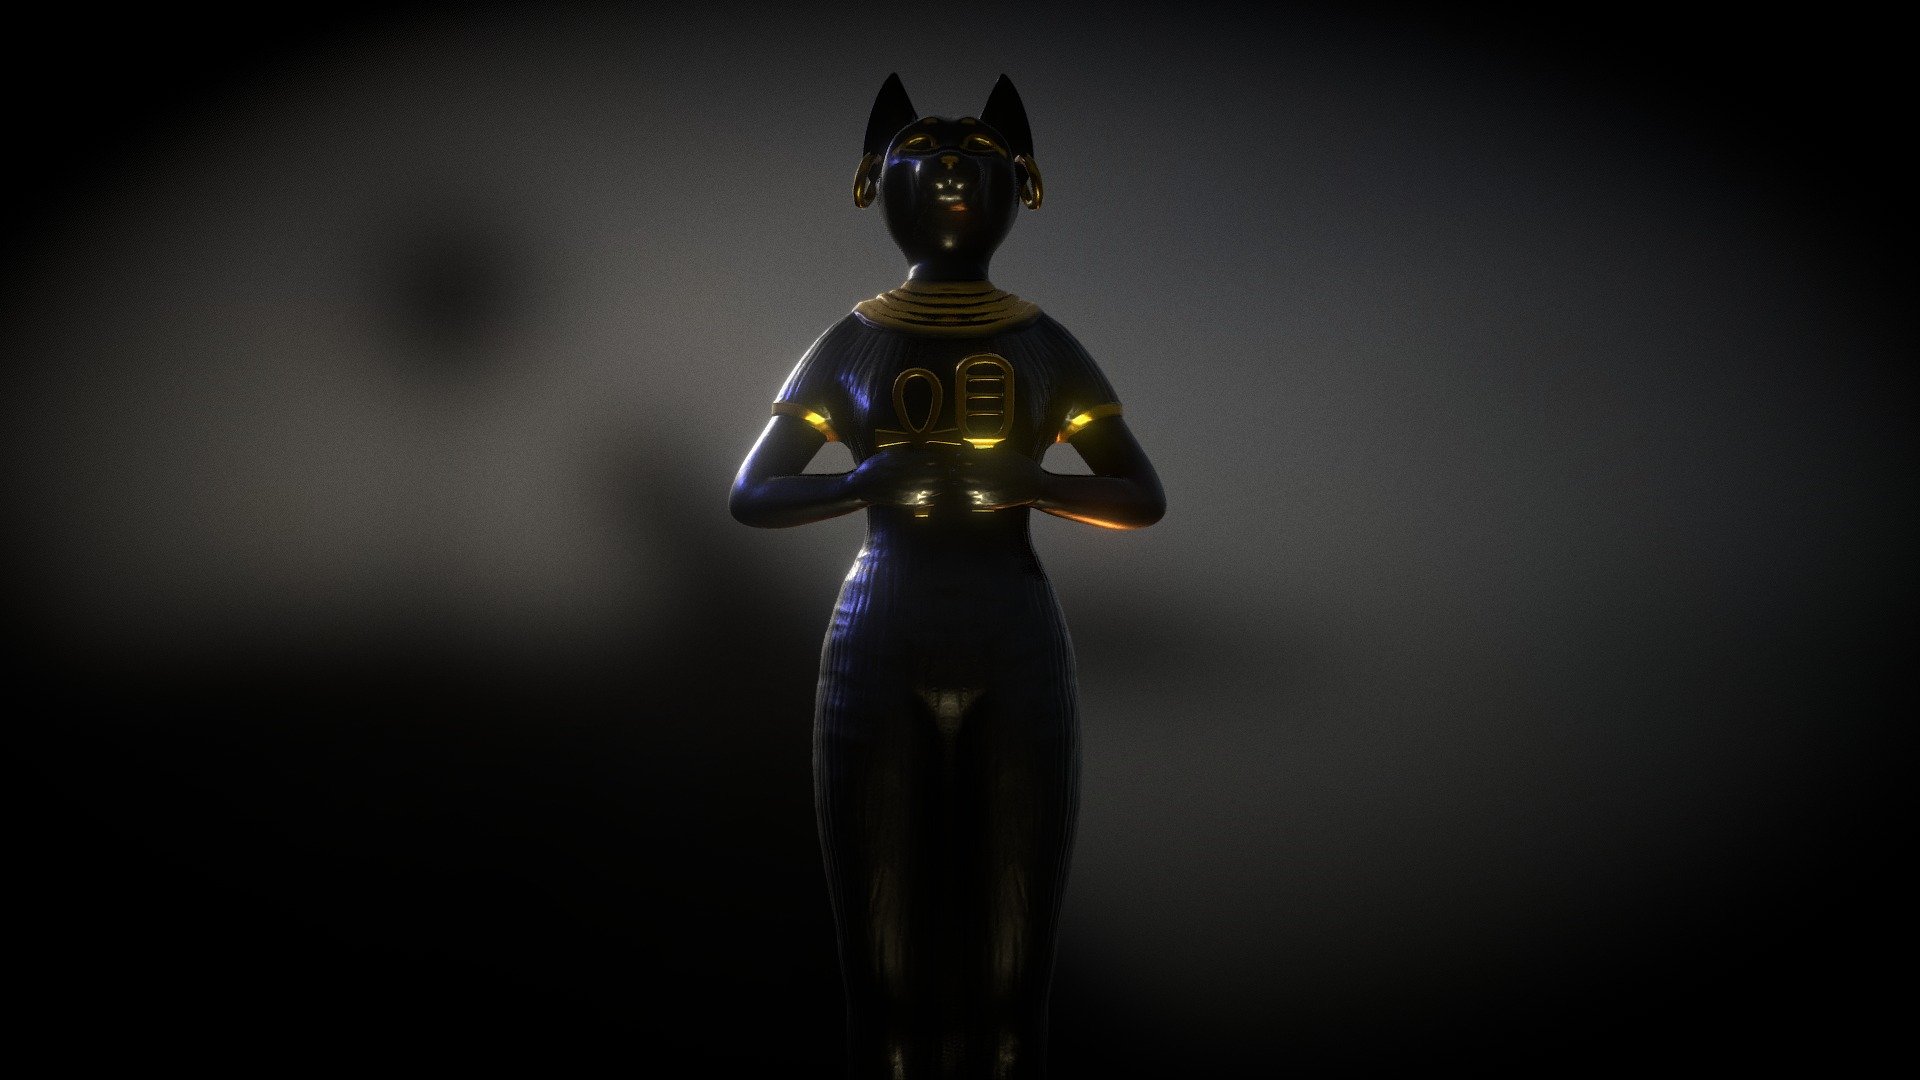 Bastet Statue (High Poly) model from Dark side of Anubis (VR hyper reality)

Trailer:
https://www.youtube.com/watch?v=A4hXisMo11o

(The models are owned by VR Vidámpark)

It was made in Zbrush. (Not scanned model.) - DsoA - Bastet Statue - 3D model by ber.vendel.design 3d model